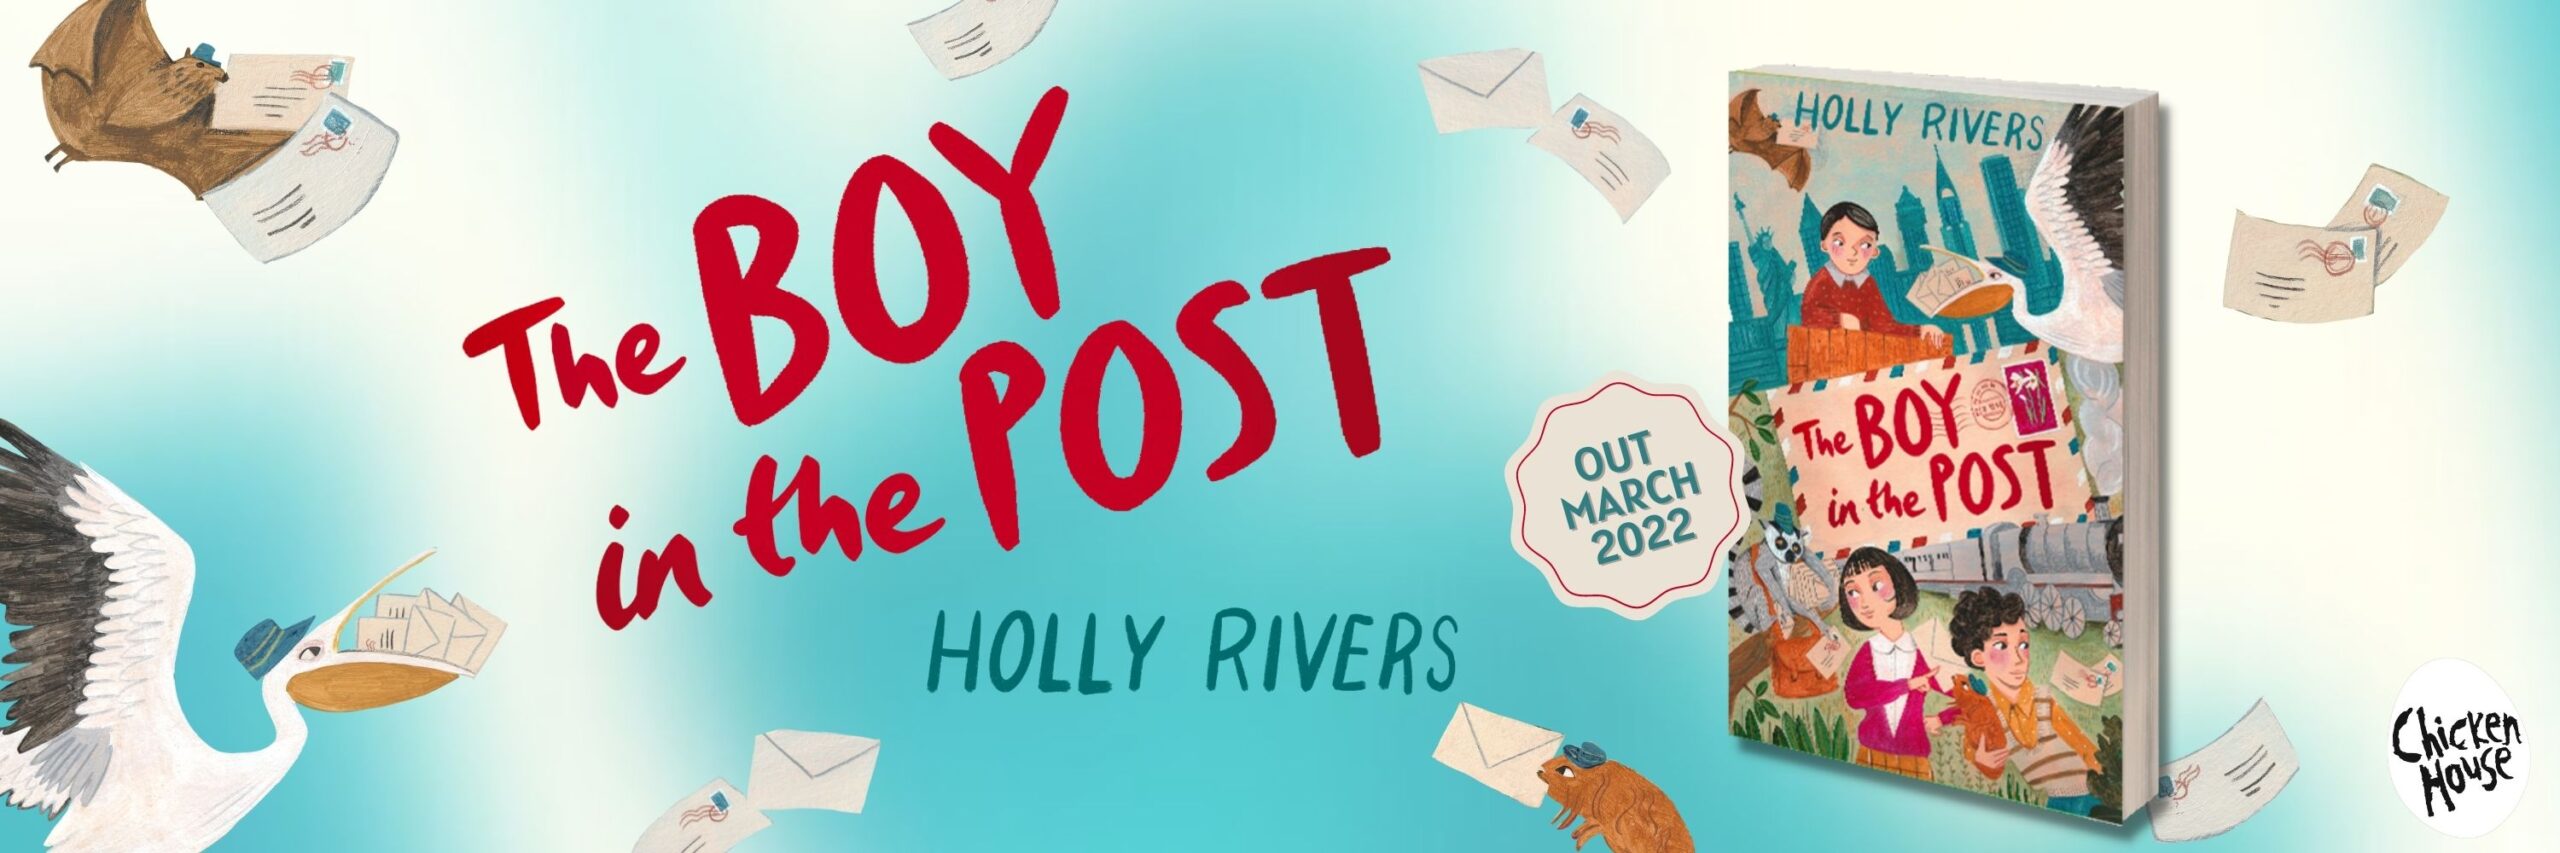 THE BOY IN THE POST by Holly Rivers